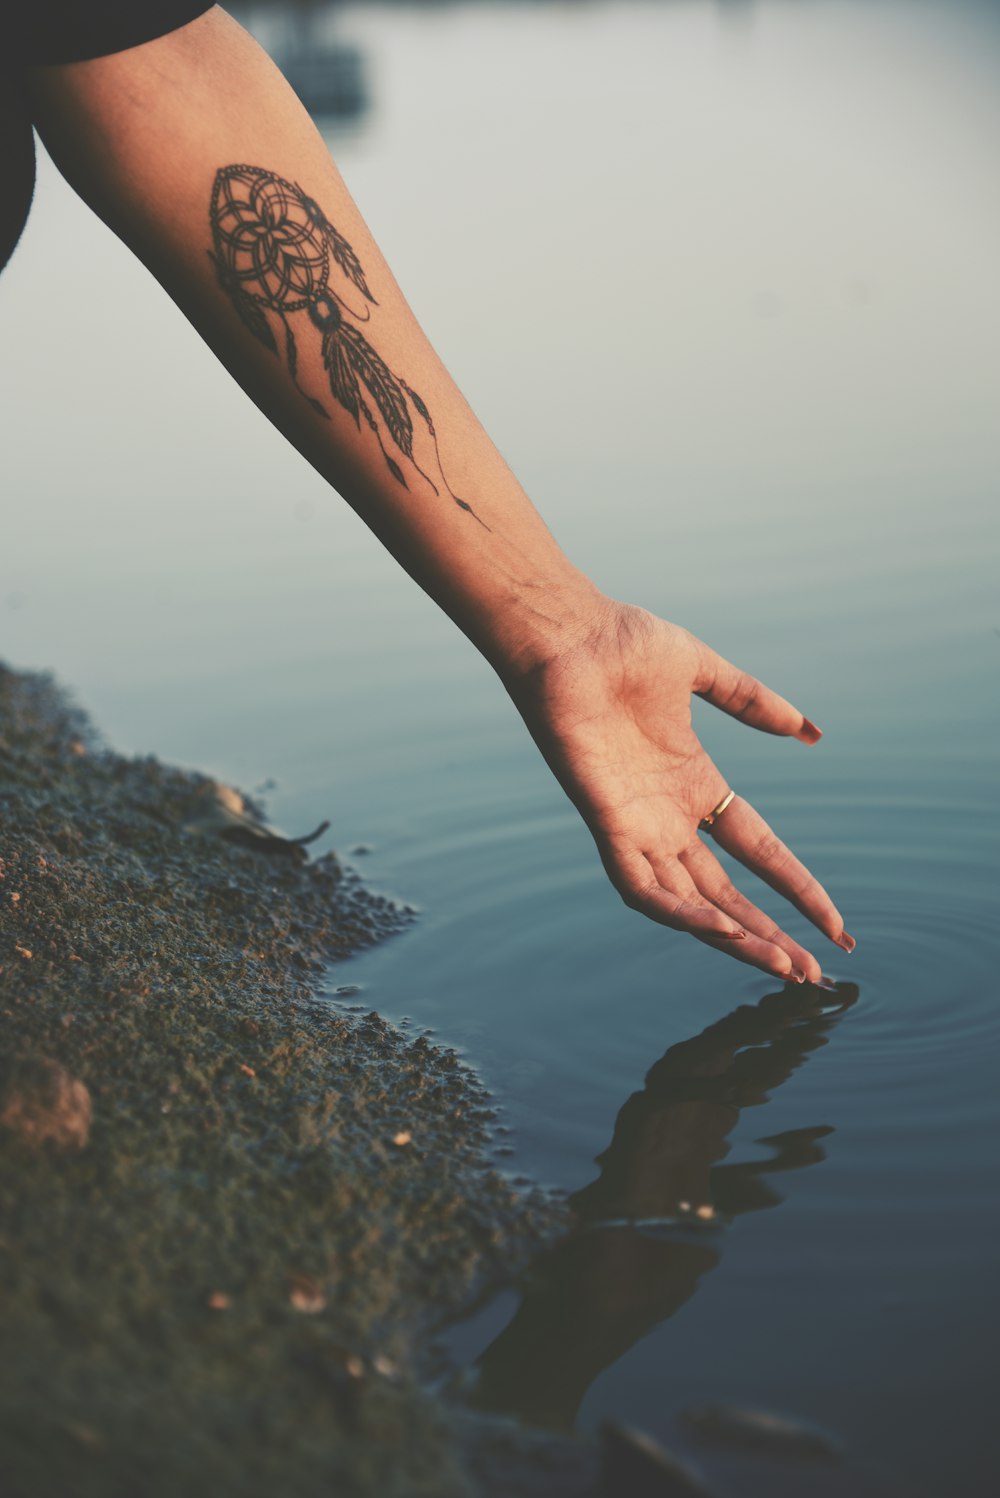 Person hand reaching calm water with dreamcatcher tattoo photo ...